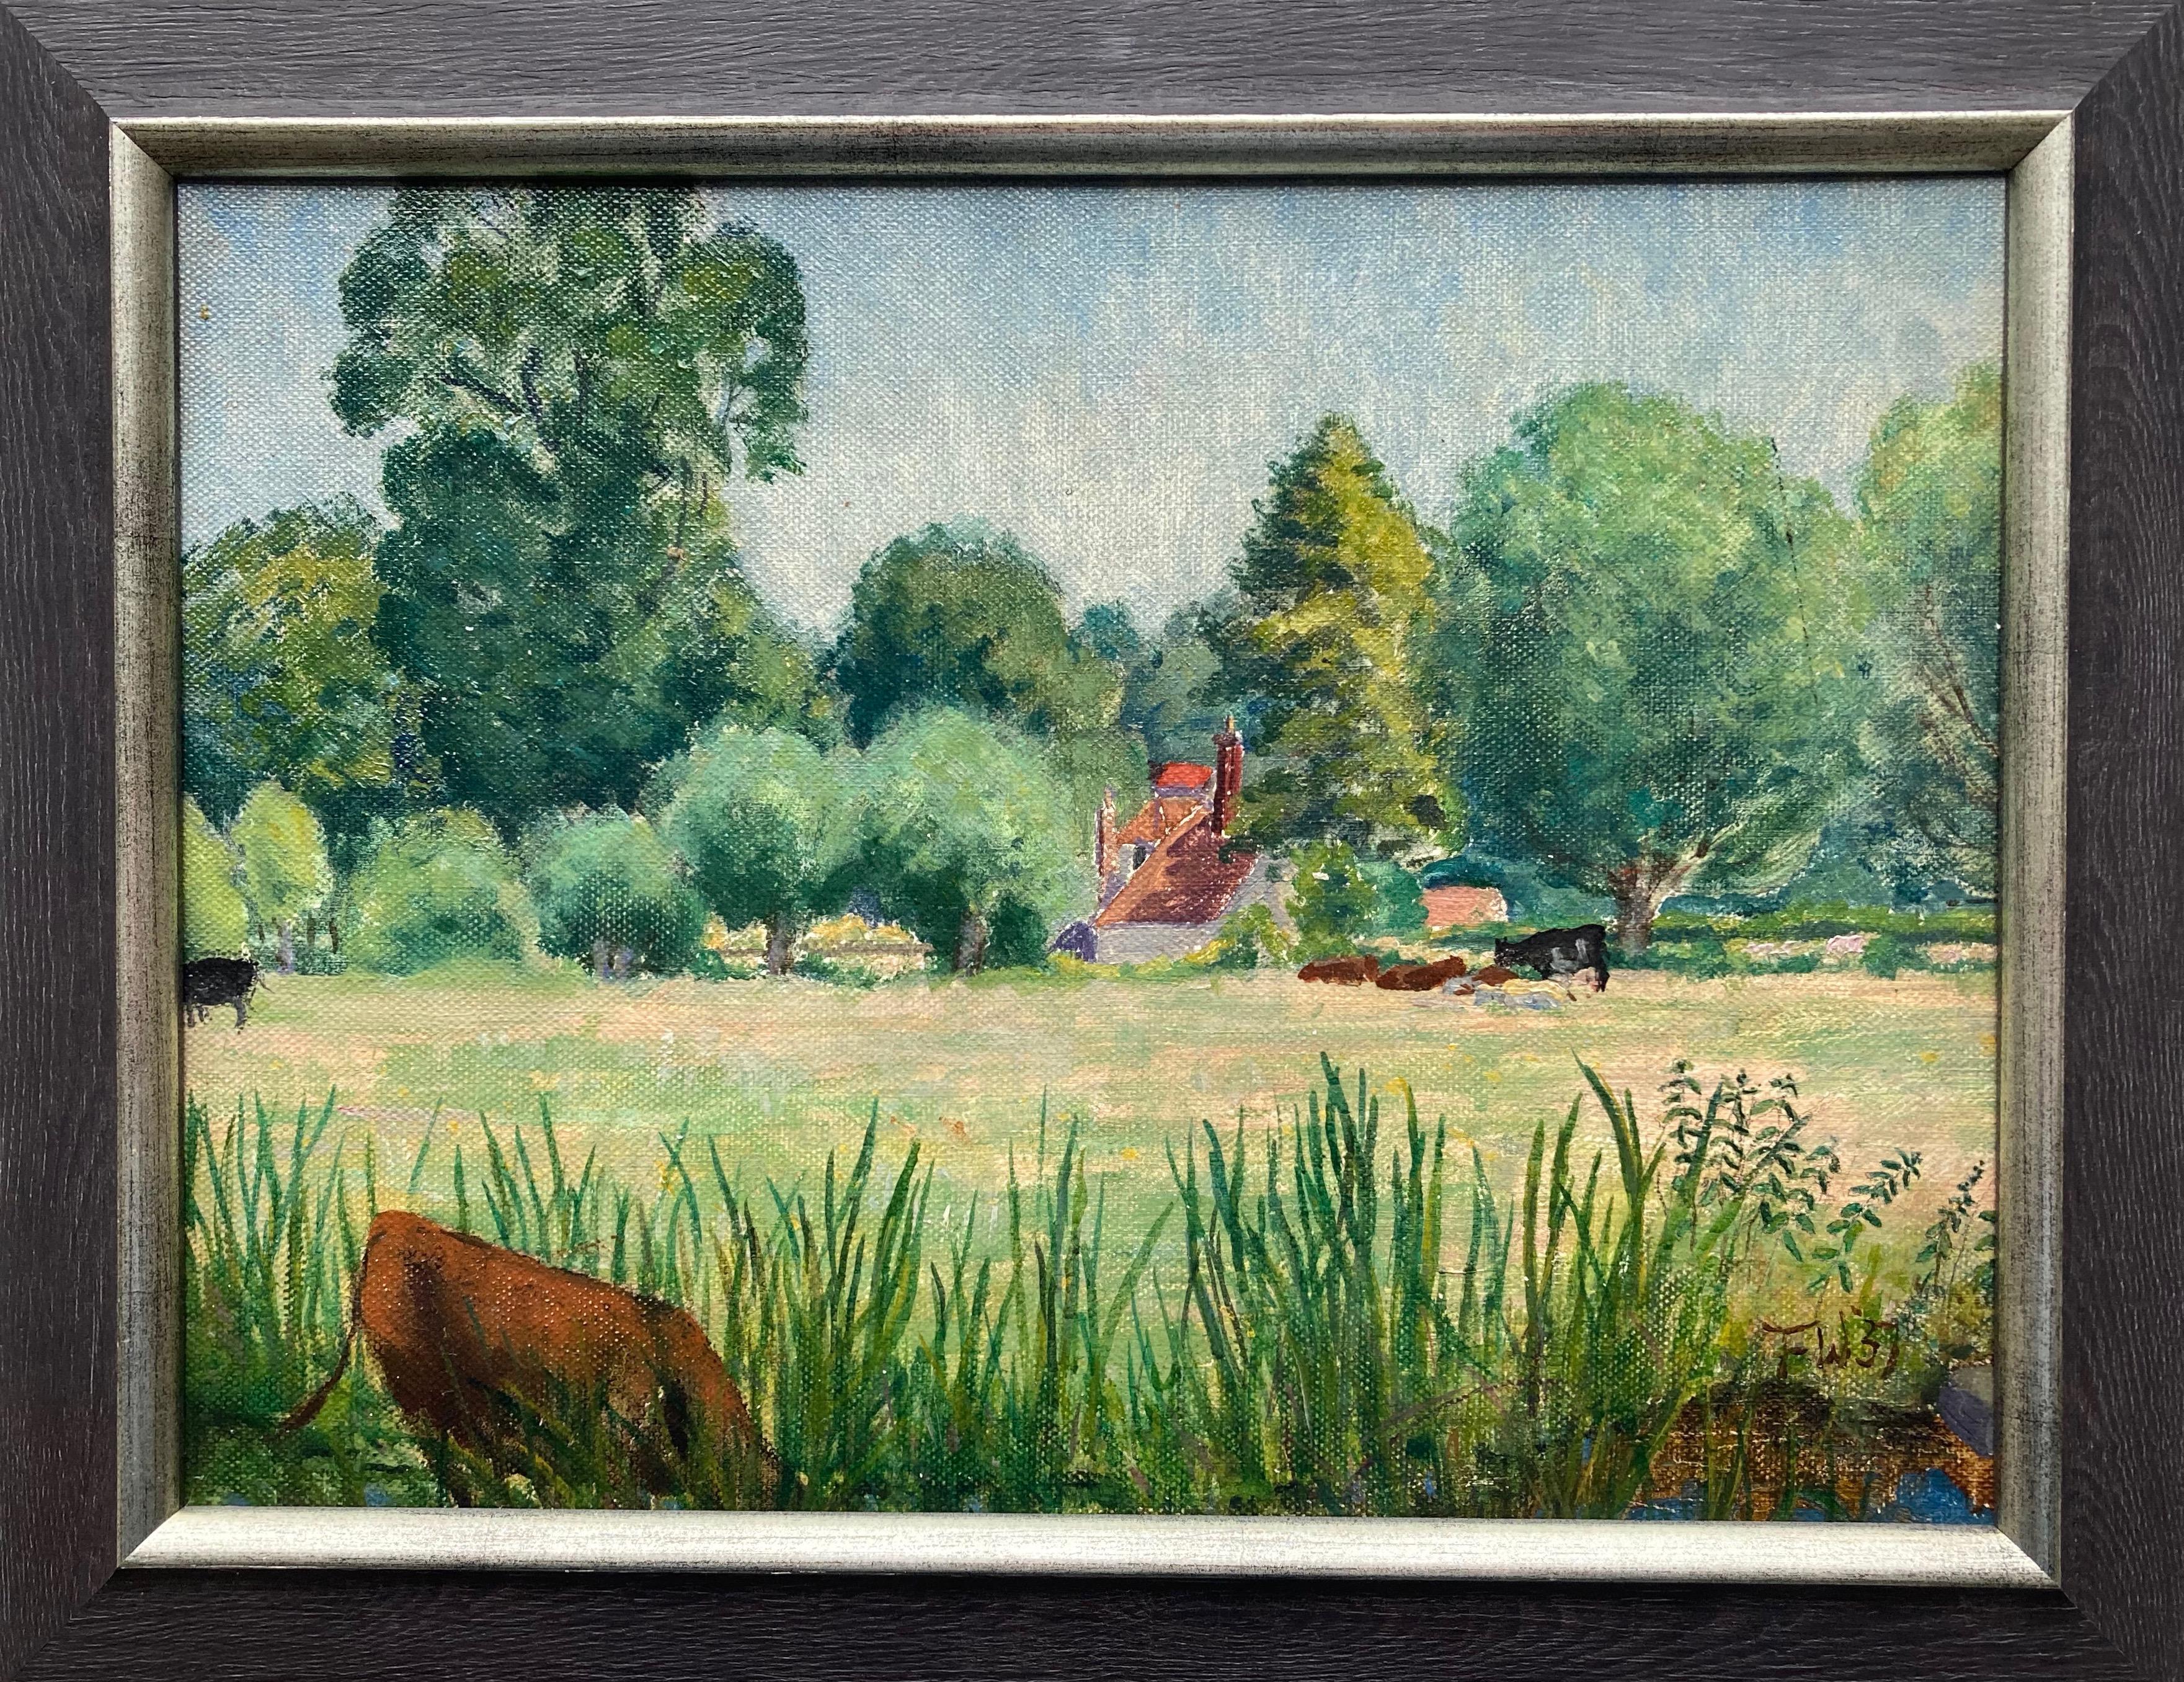 A wonderful image of an English country cottage set in a meadow with cattle grazing.

Franklin White (1892-1975)
A cottage in the countryside
Signed with initials and dated (19)32
Oil on canvas laid on board
9 x 12 inches unframed
12 x 15 inches